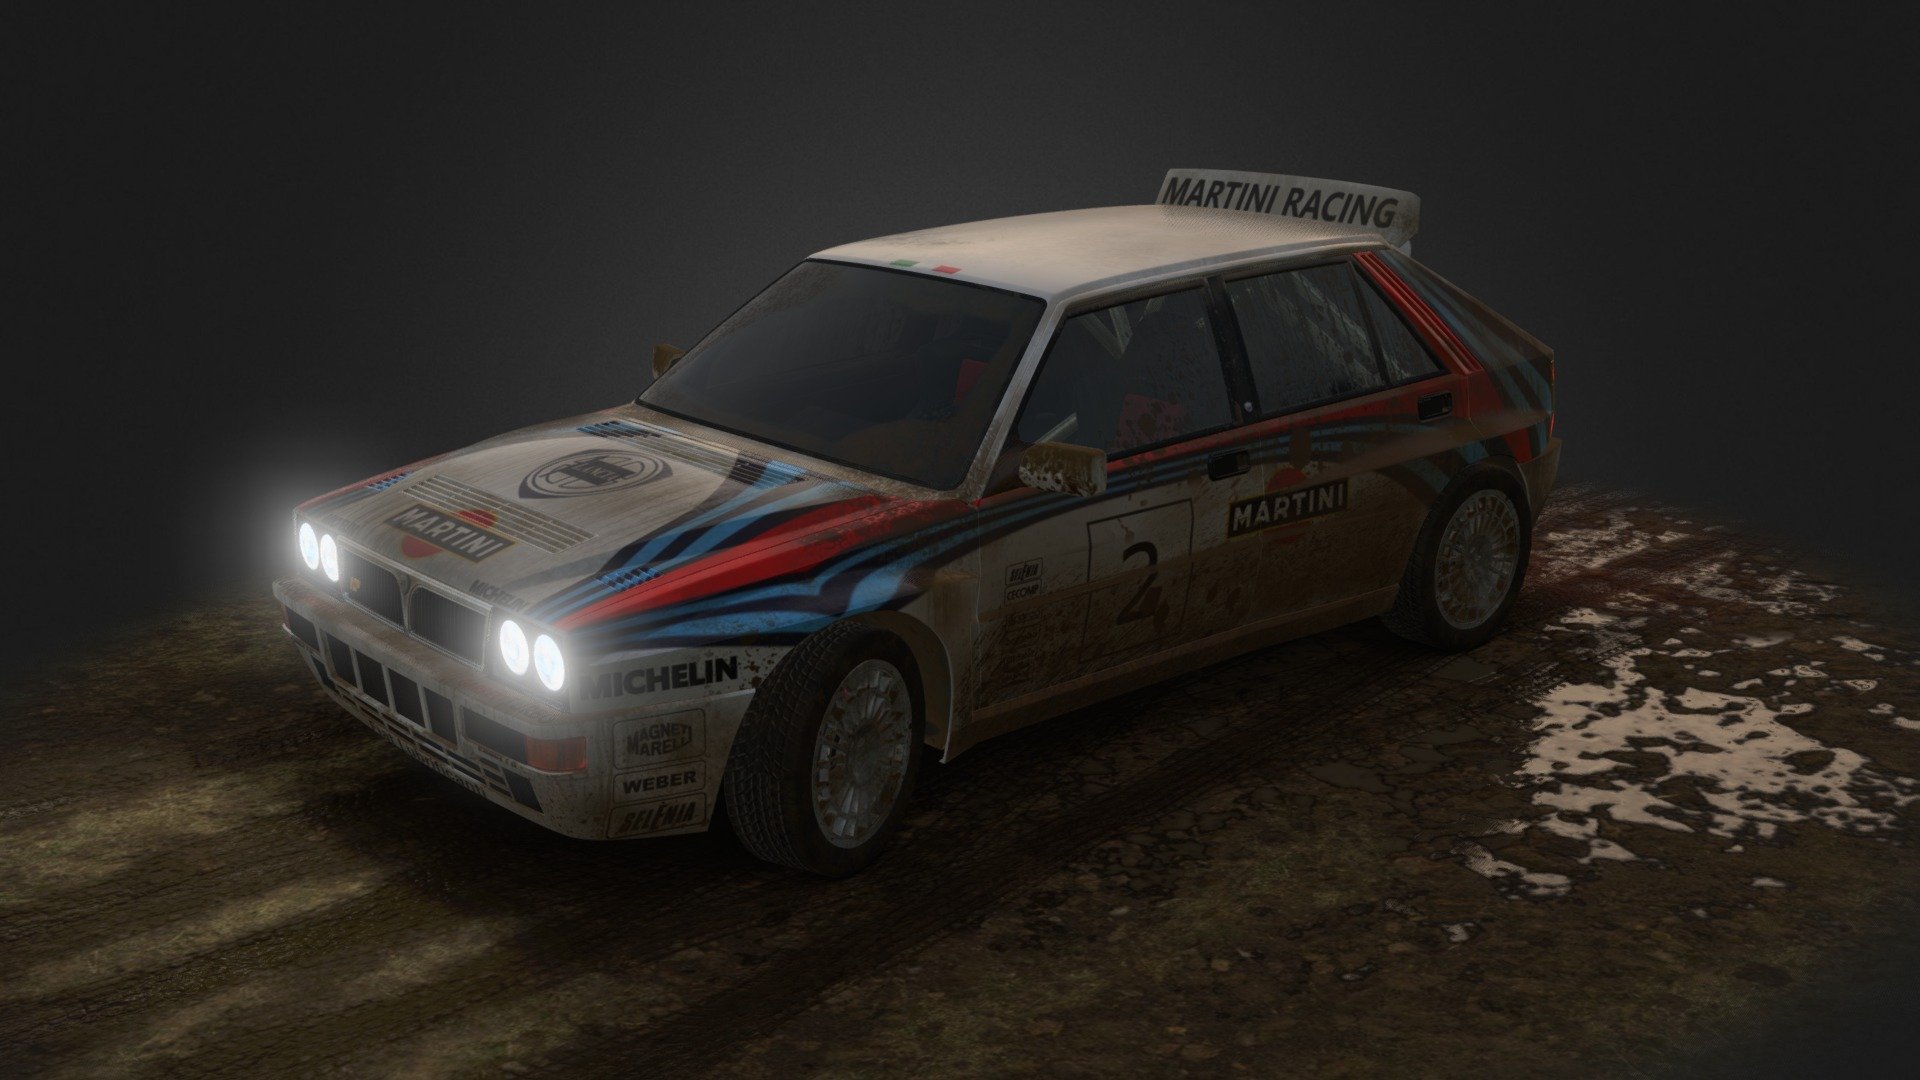 3D model credits: www.dmi-3d.net

The car was introduced for the 1987 World Rally Championship season and dominated the World Rally Championship, scoring 46 WRC victories overall and winning the constructors' championship a record six times in a row from 1987 to 1992, in addition to drivers' championship titles for Juha Kankkunen (1987 and 1991) and Miki Biasion (1988 and 1989), making Lancia the most successful marque in the history of the WRC and the Delta the most successful car 3d model